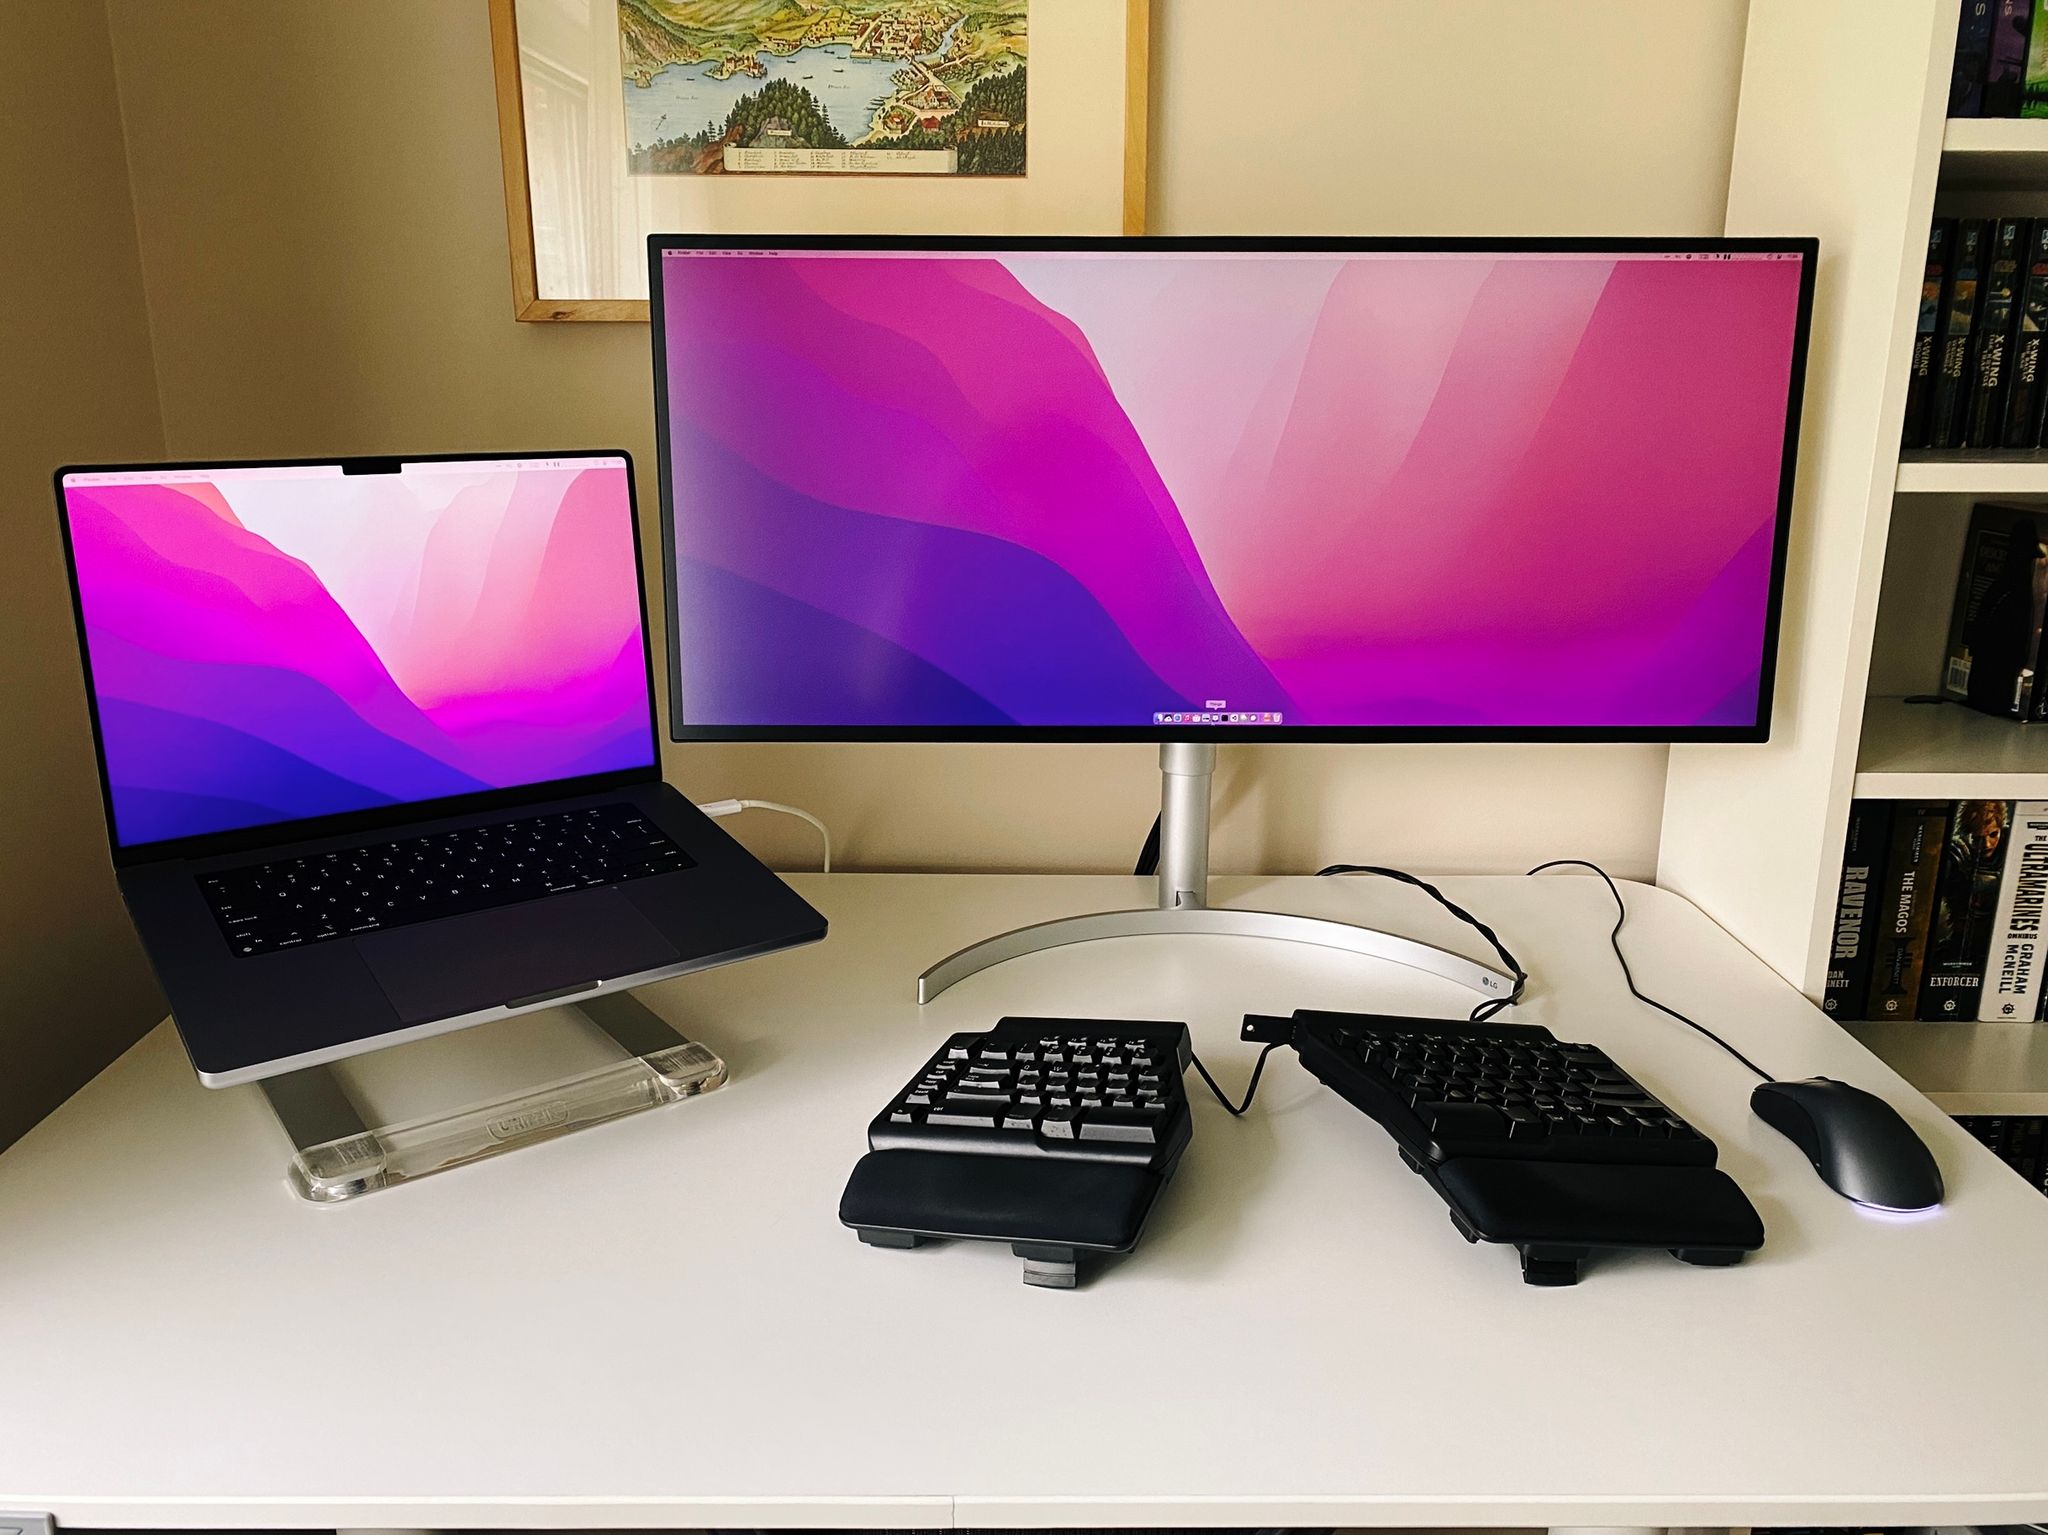 A photo of my new desk setup: a 34K LG Ultrawide monitor with a Space Grey M1 Max MacBook Pro off to the left sitting on a laptop stand, with one single cable coming out of the laptop that provides power, USB, and video.